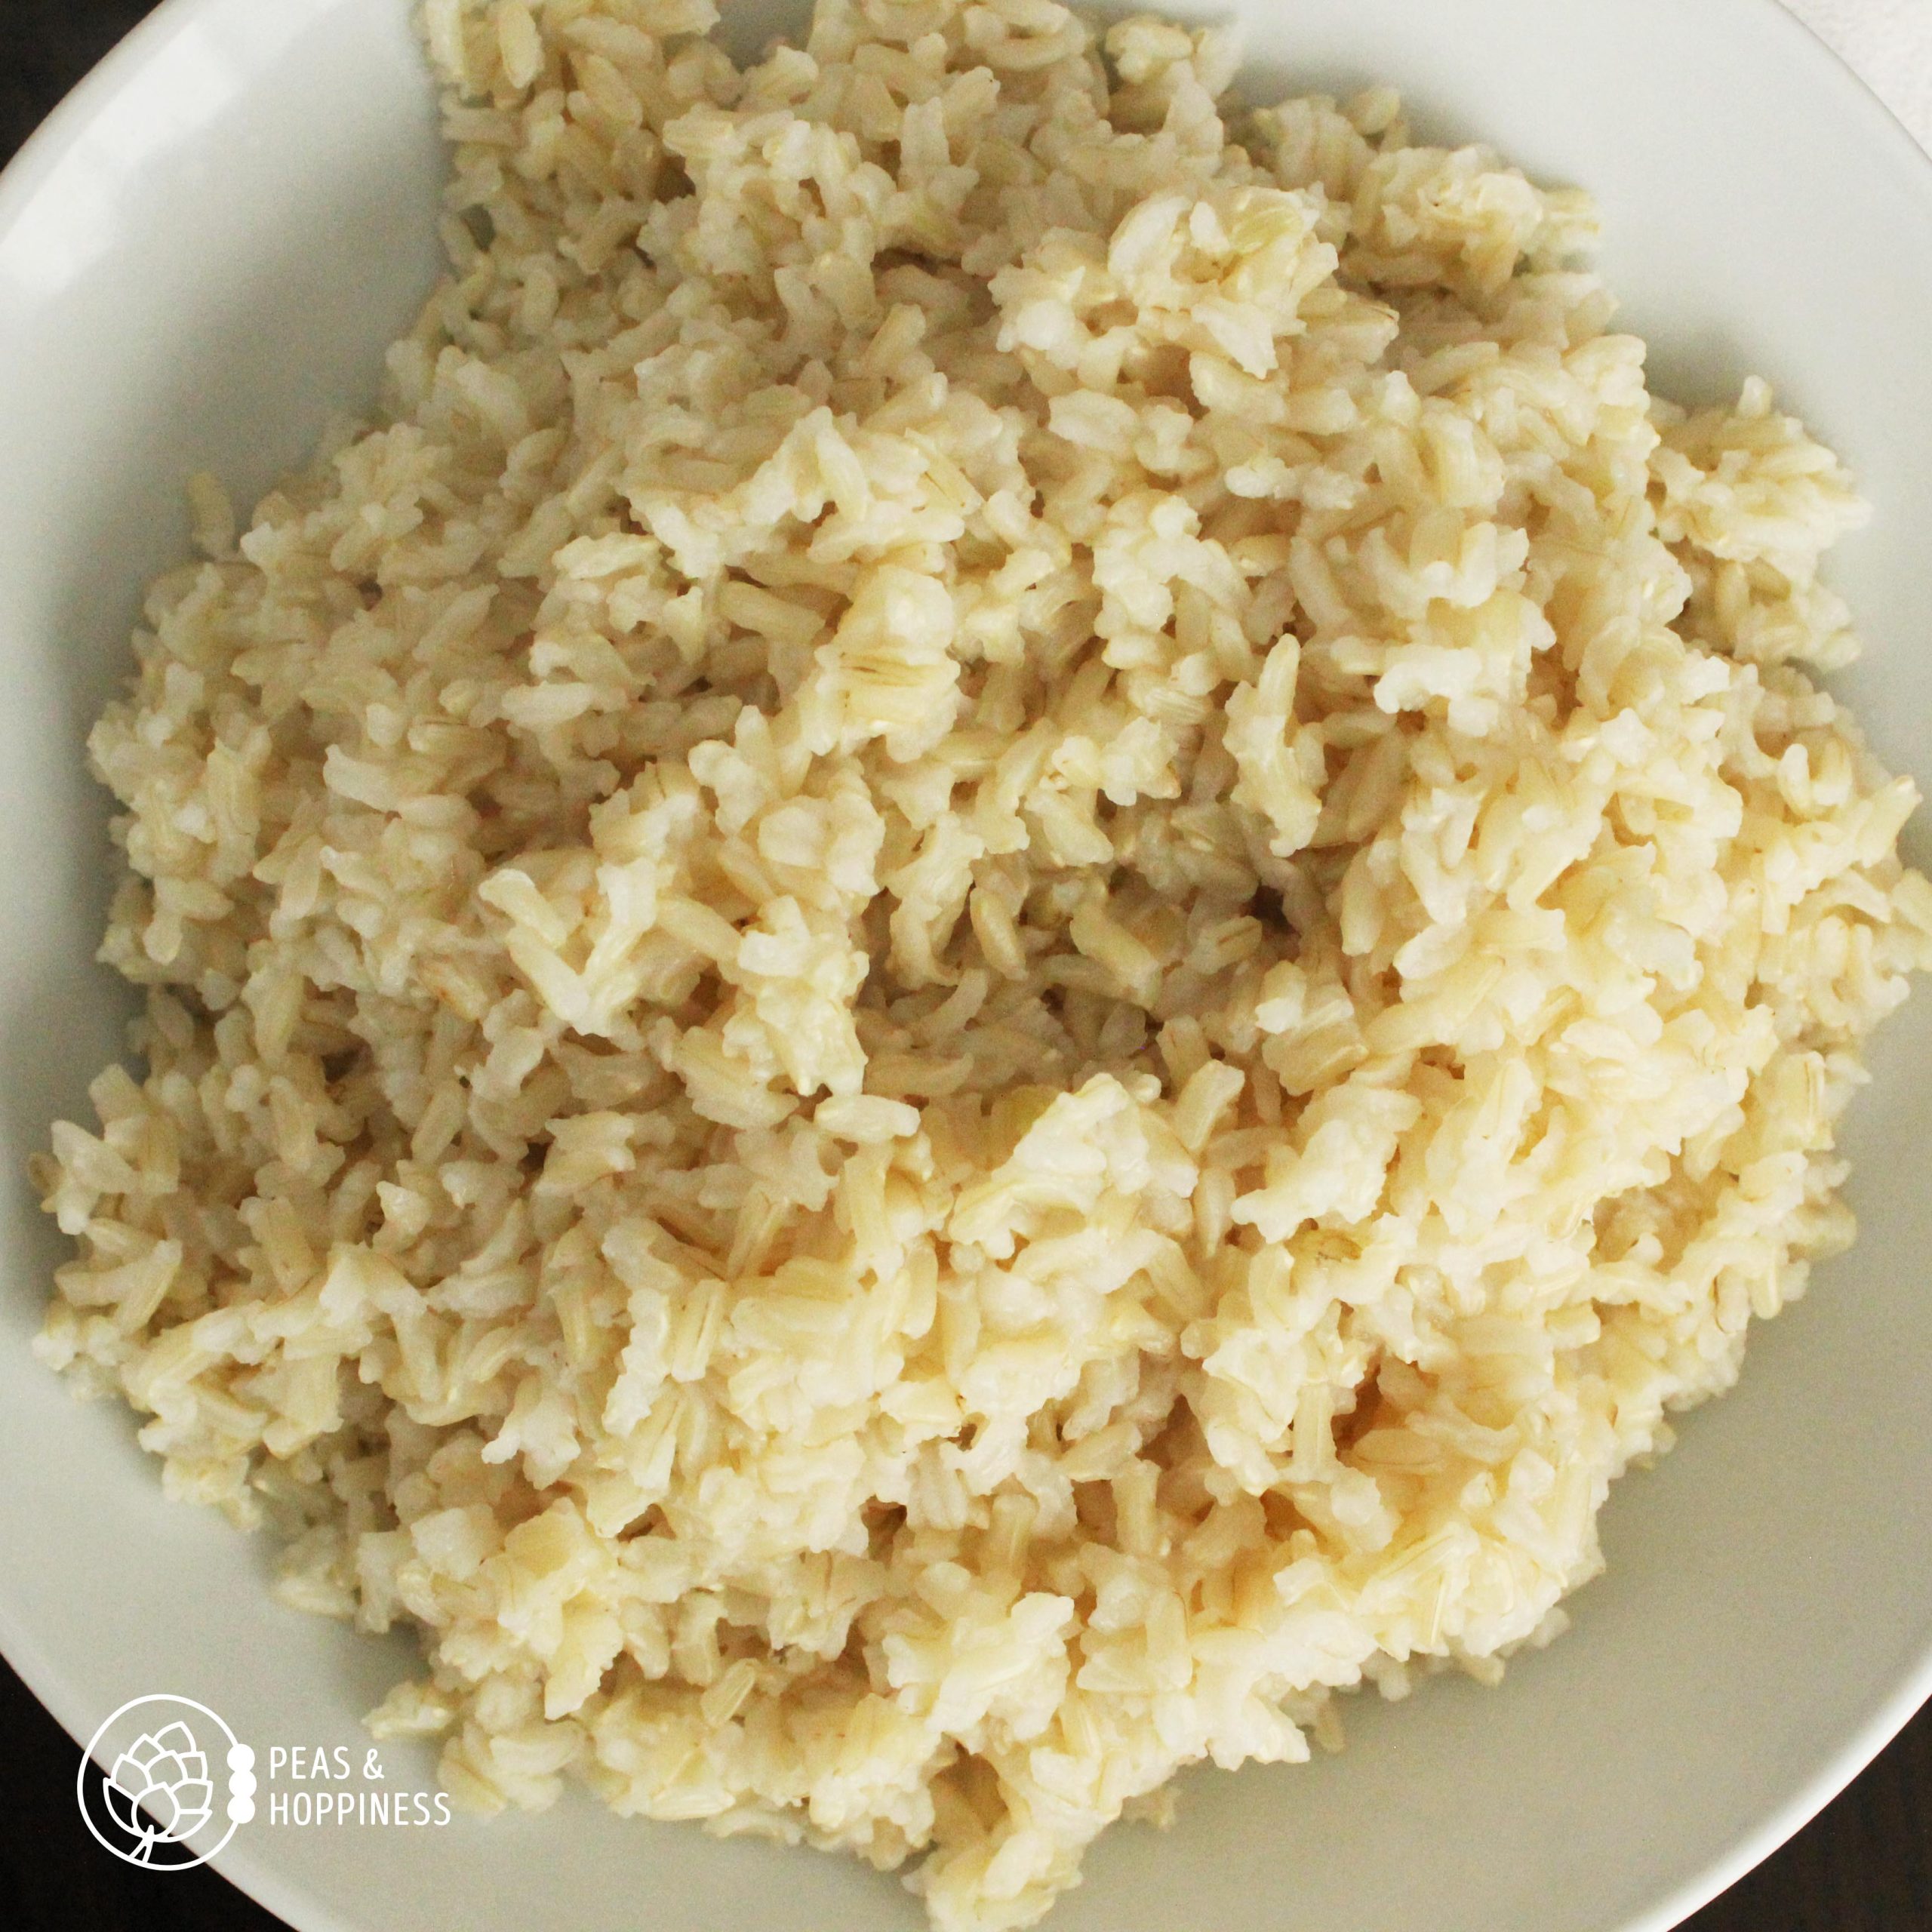 Cooked Brown Rice in a Bowl